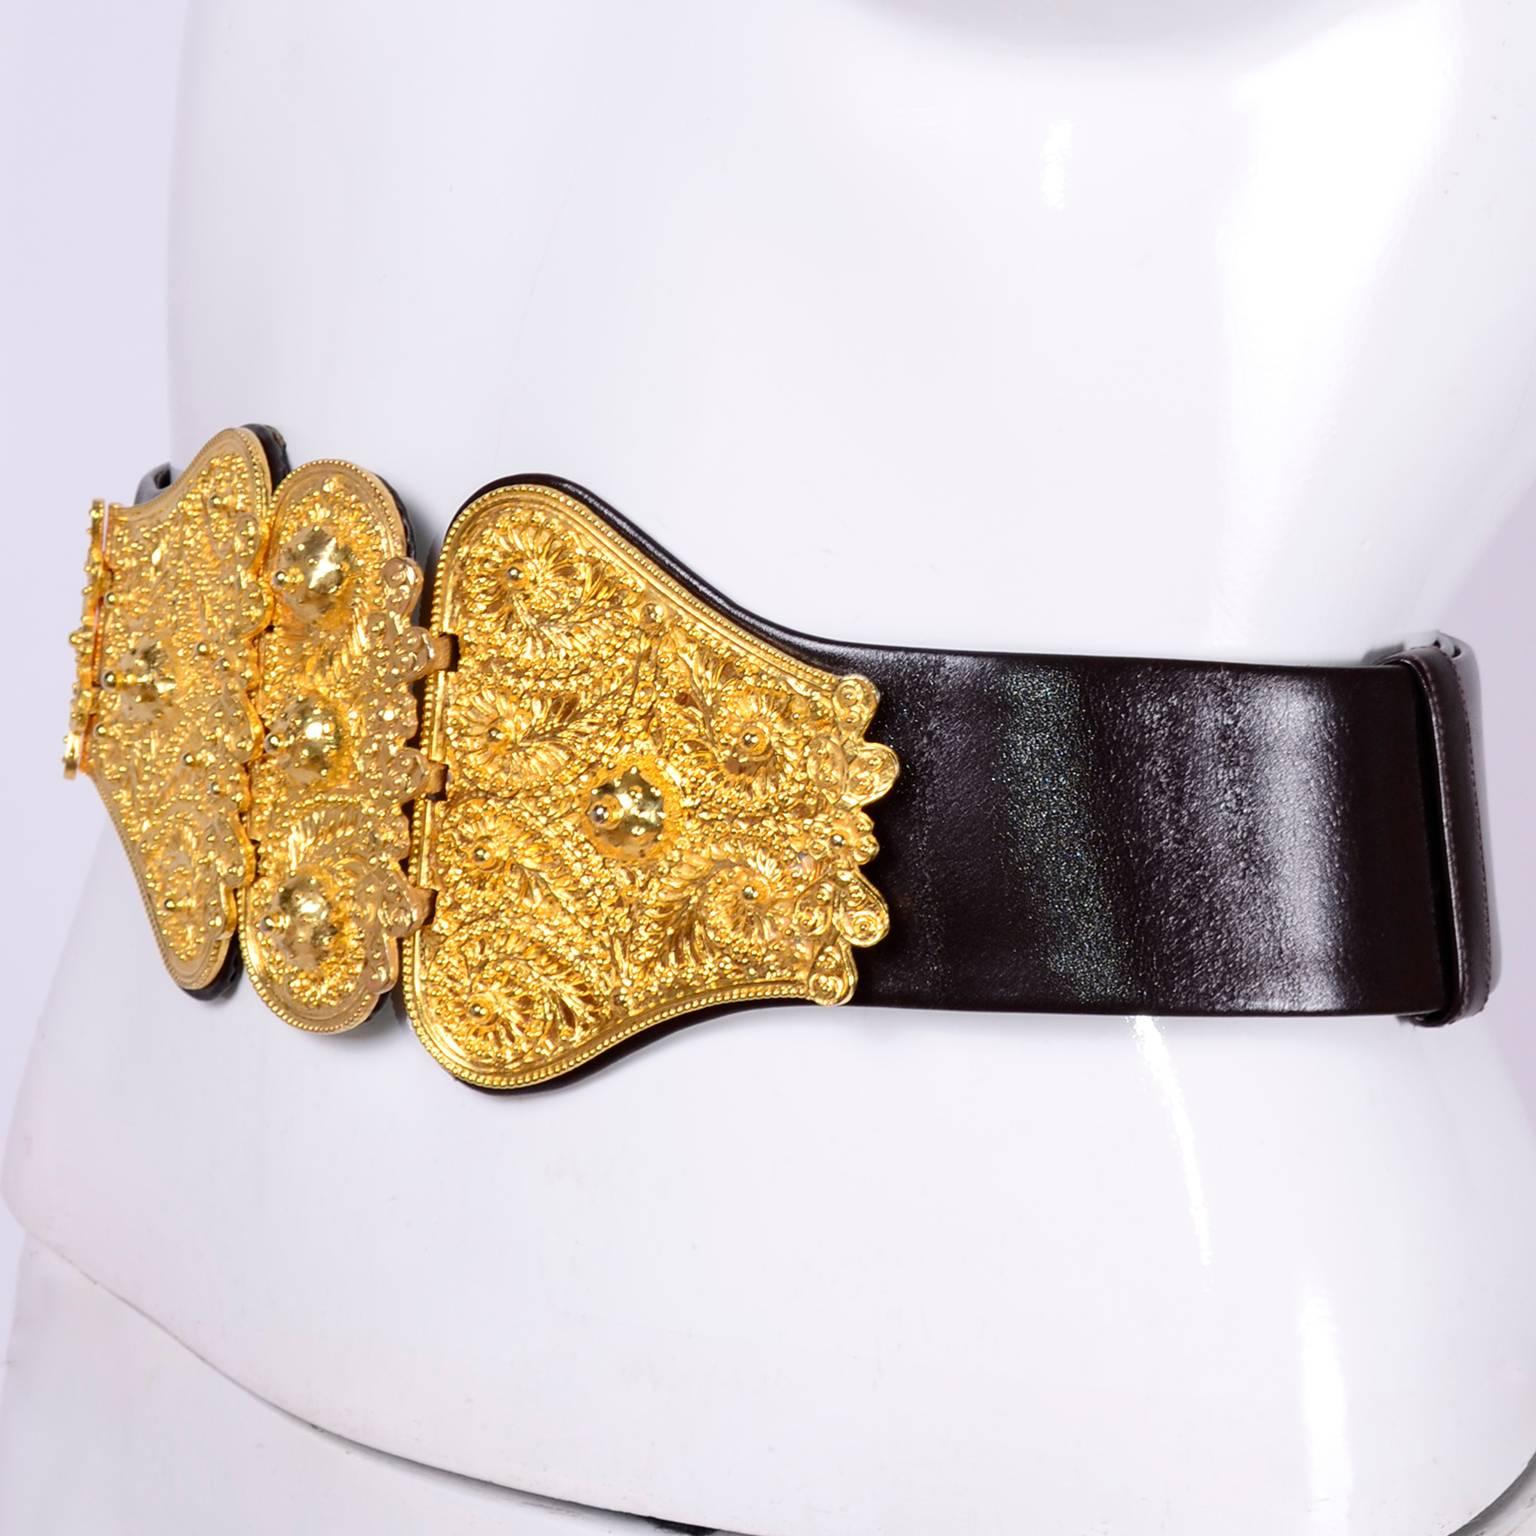 1980s Judith Leiber Black Leather Belt With Gold Buckle & Adjustable Size 3